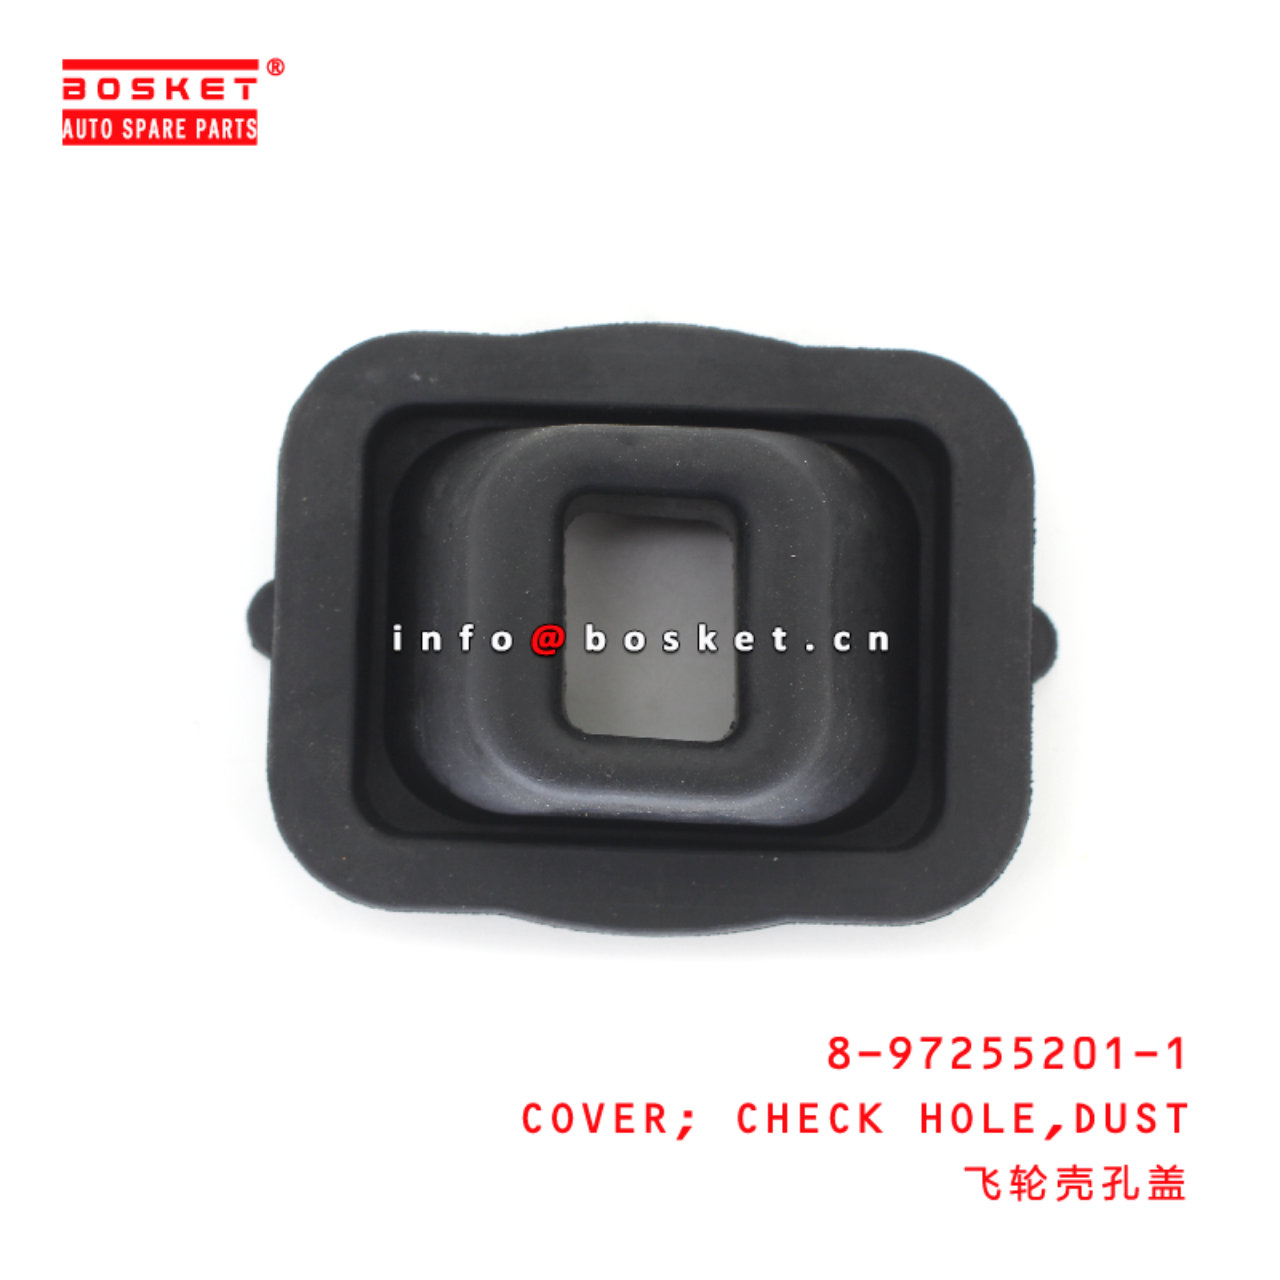 8-97255201-1 Check Hole Dust Cover suitable for ISUZU 8972552011